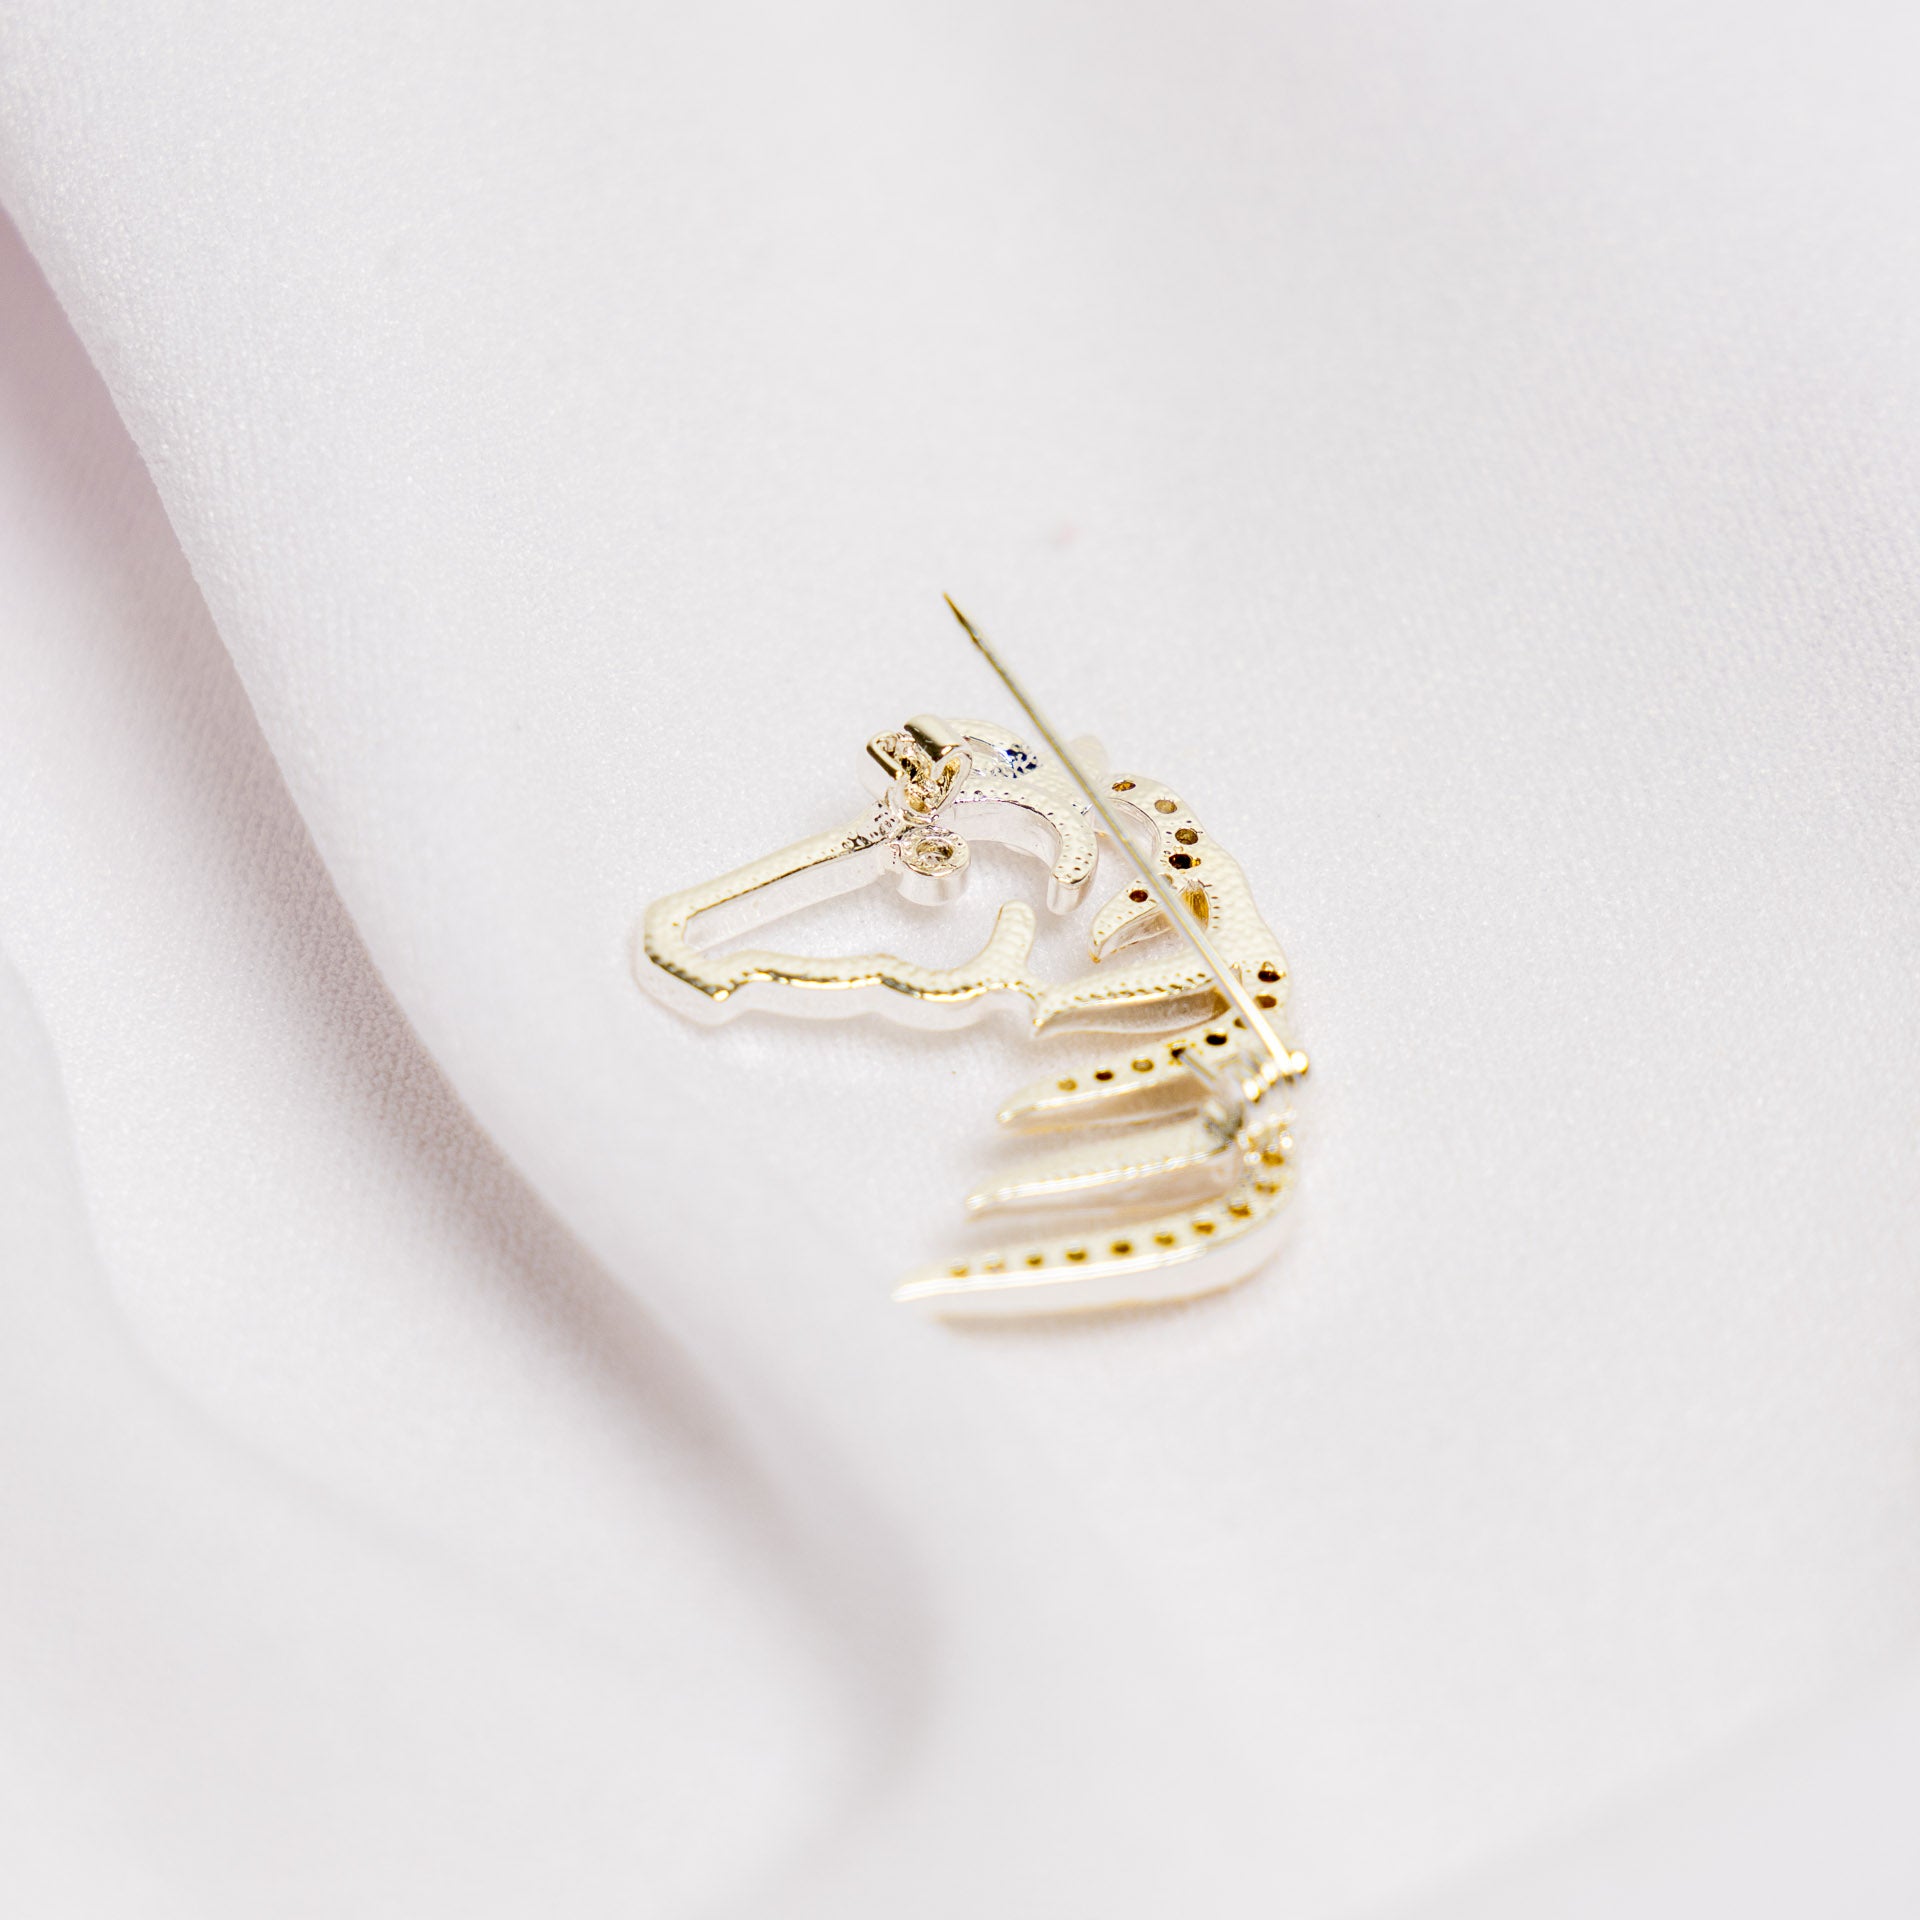 Silver & Gold Plated Horse Head Brooch